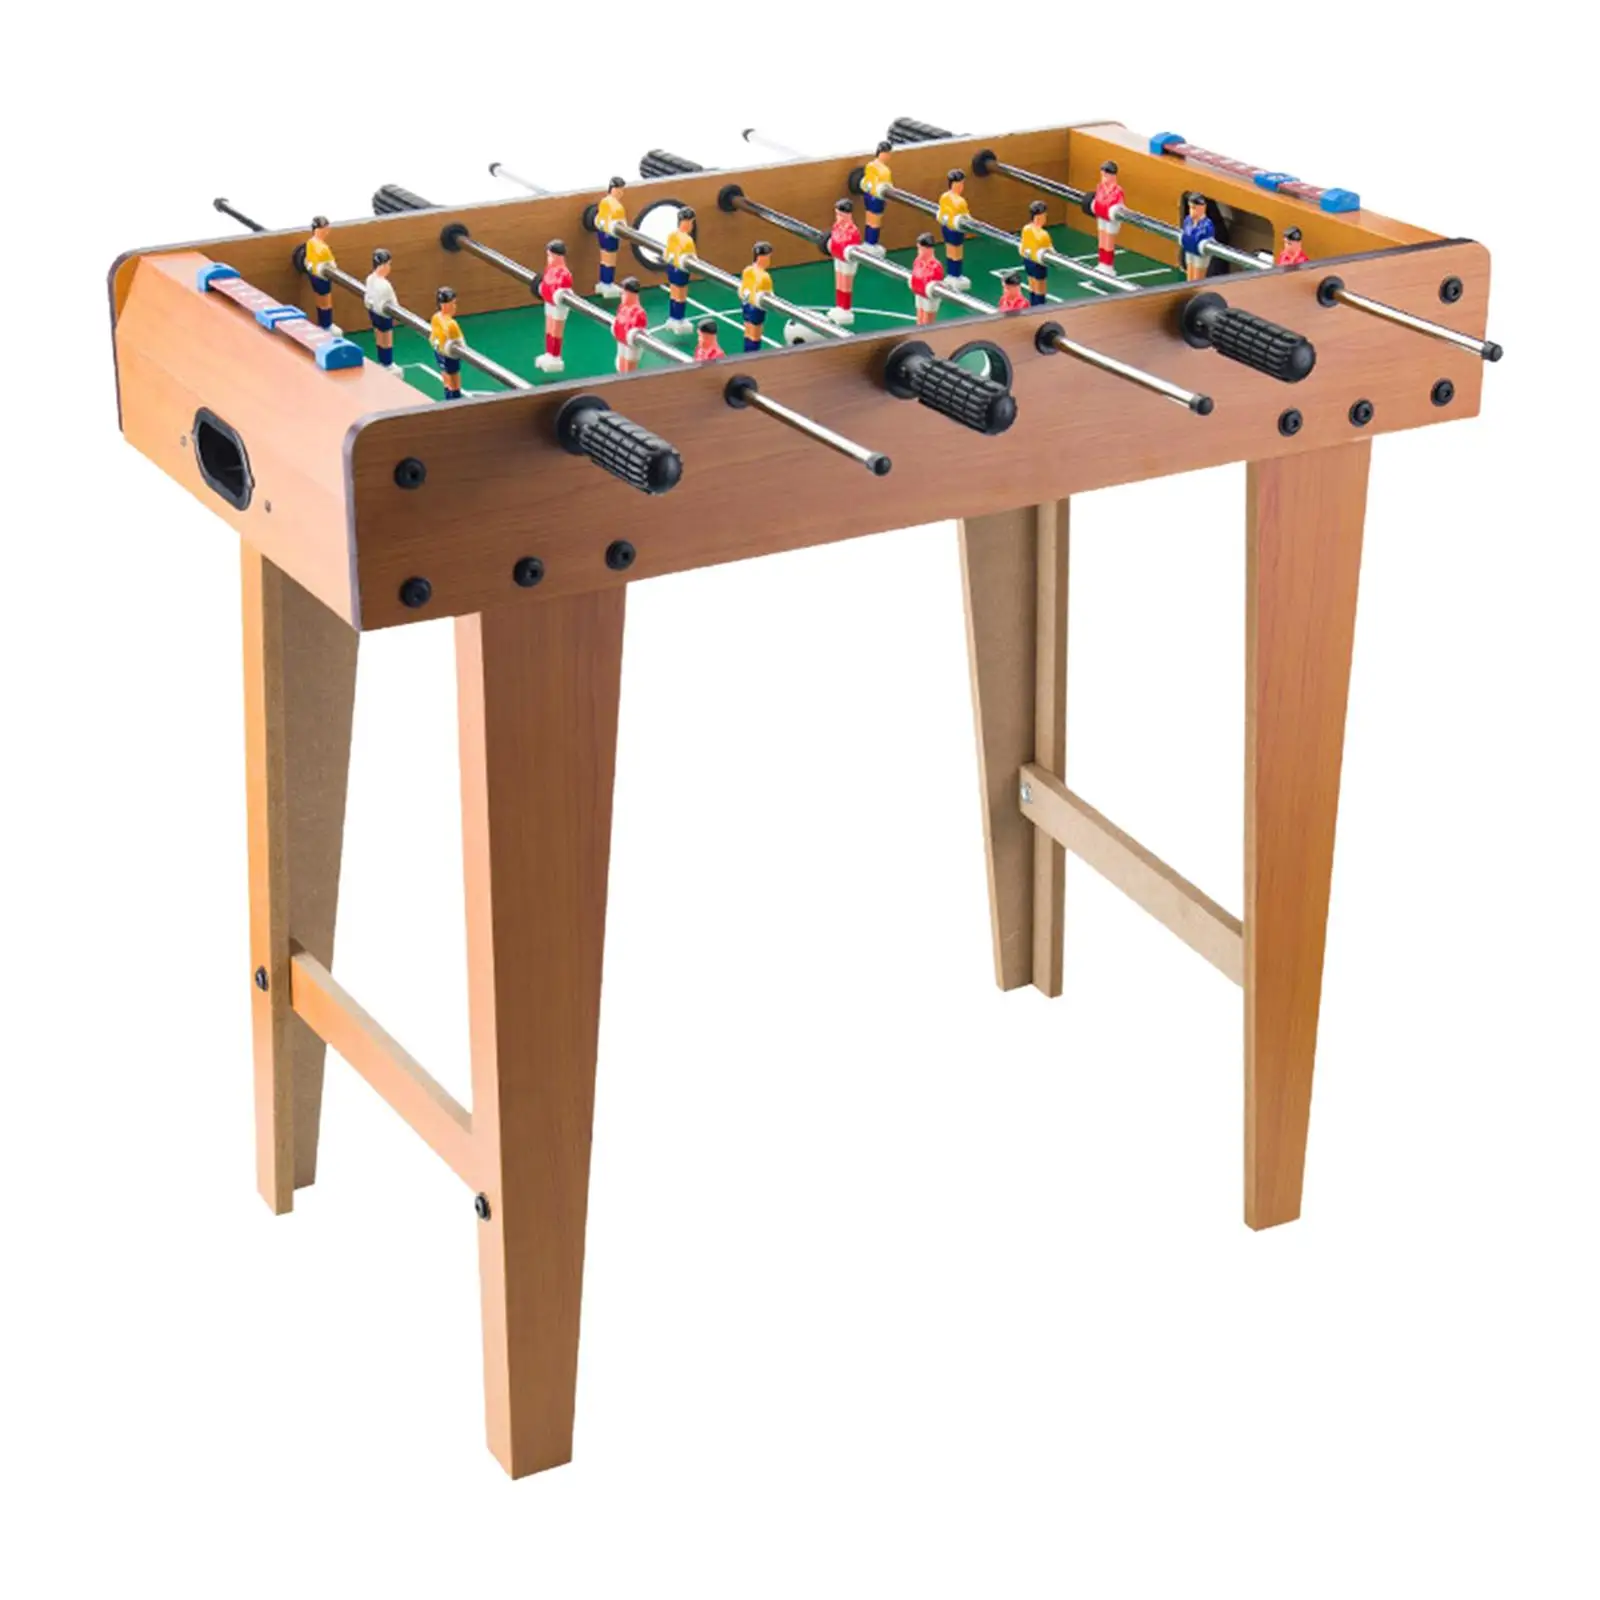 Wood Foosball Table Toy Tabletop Football Soccer Game Funny Football Game Play Sports Table Top Football Table for Kids Indoor